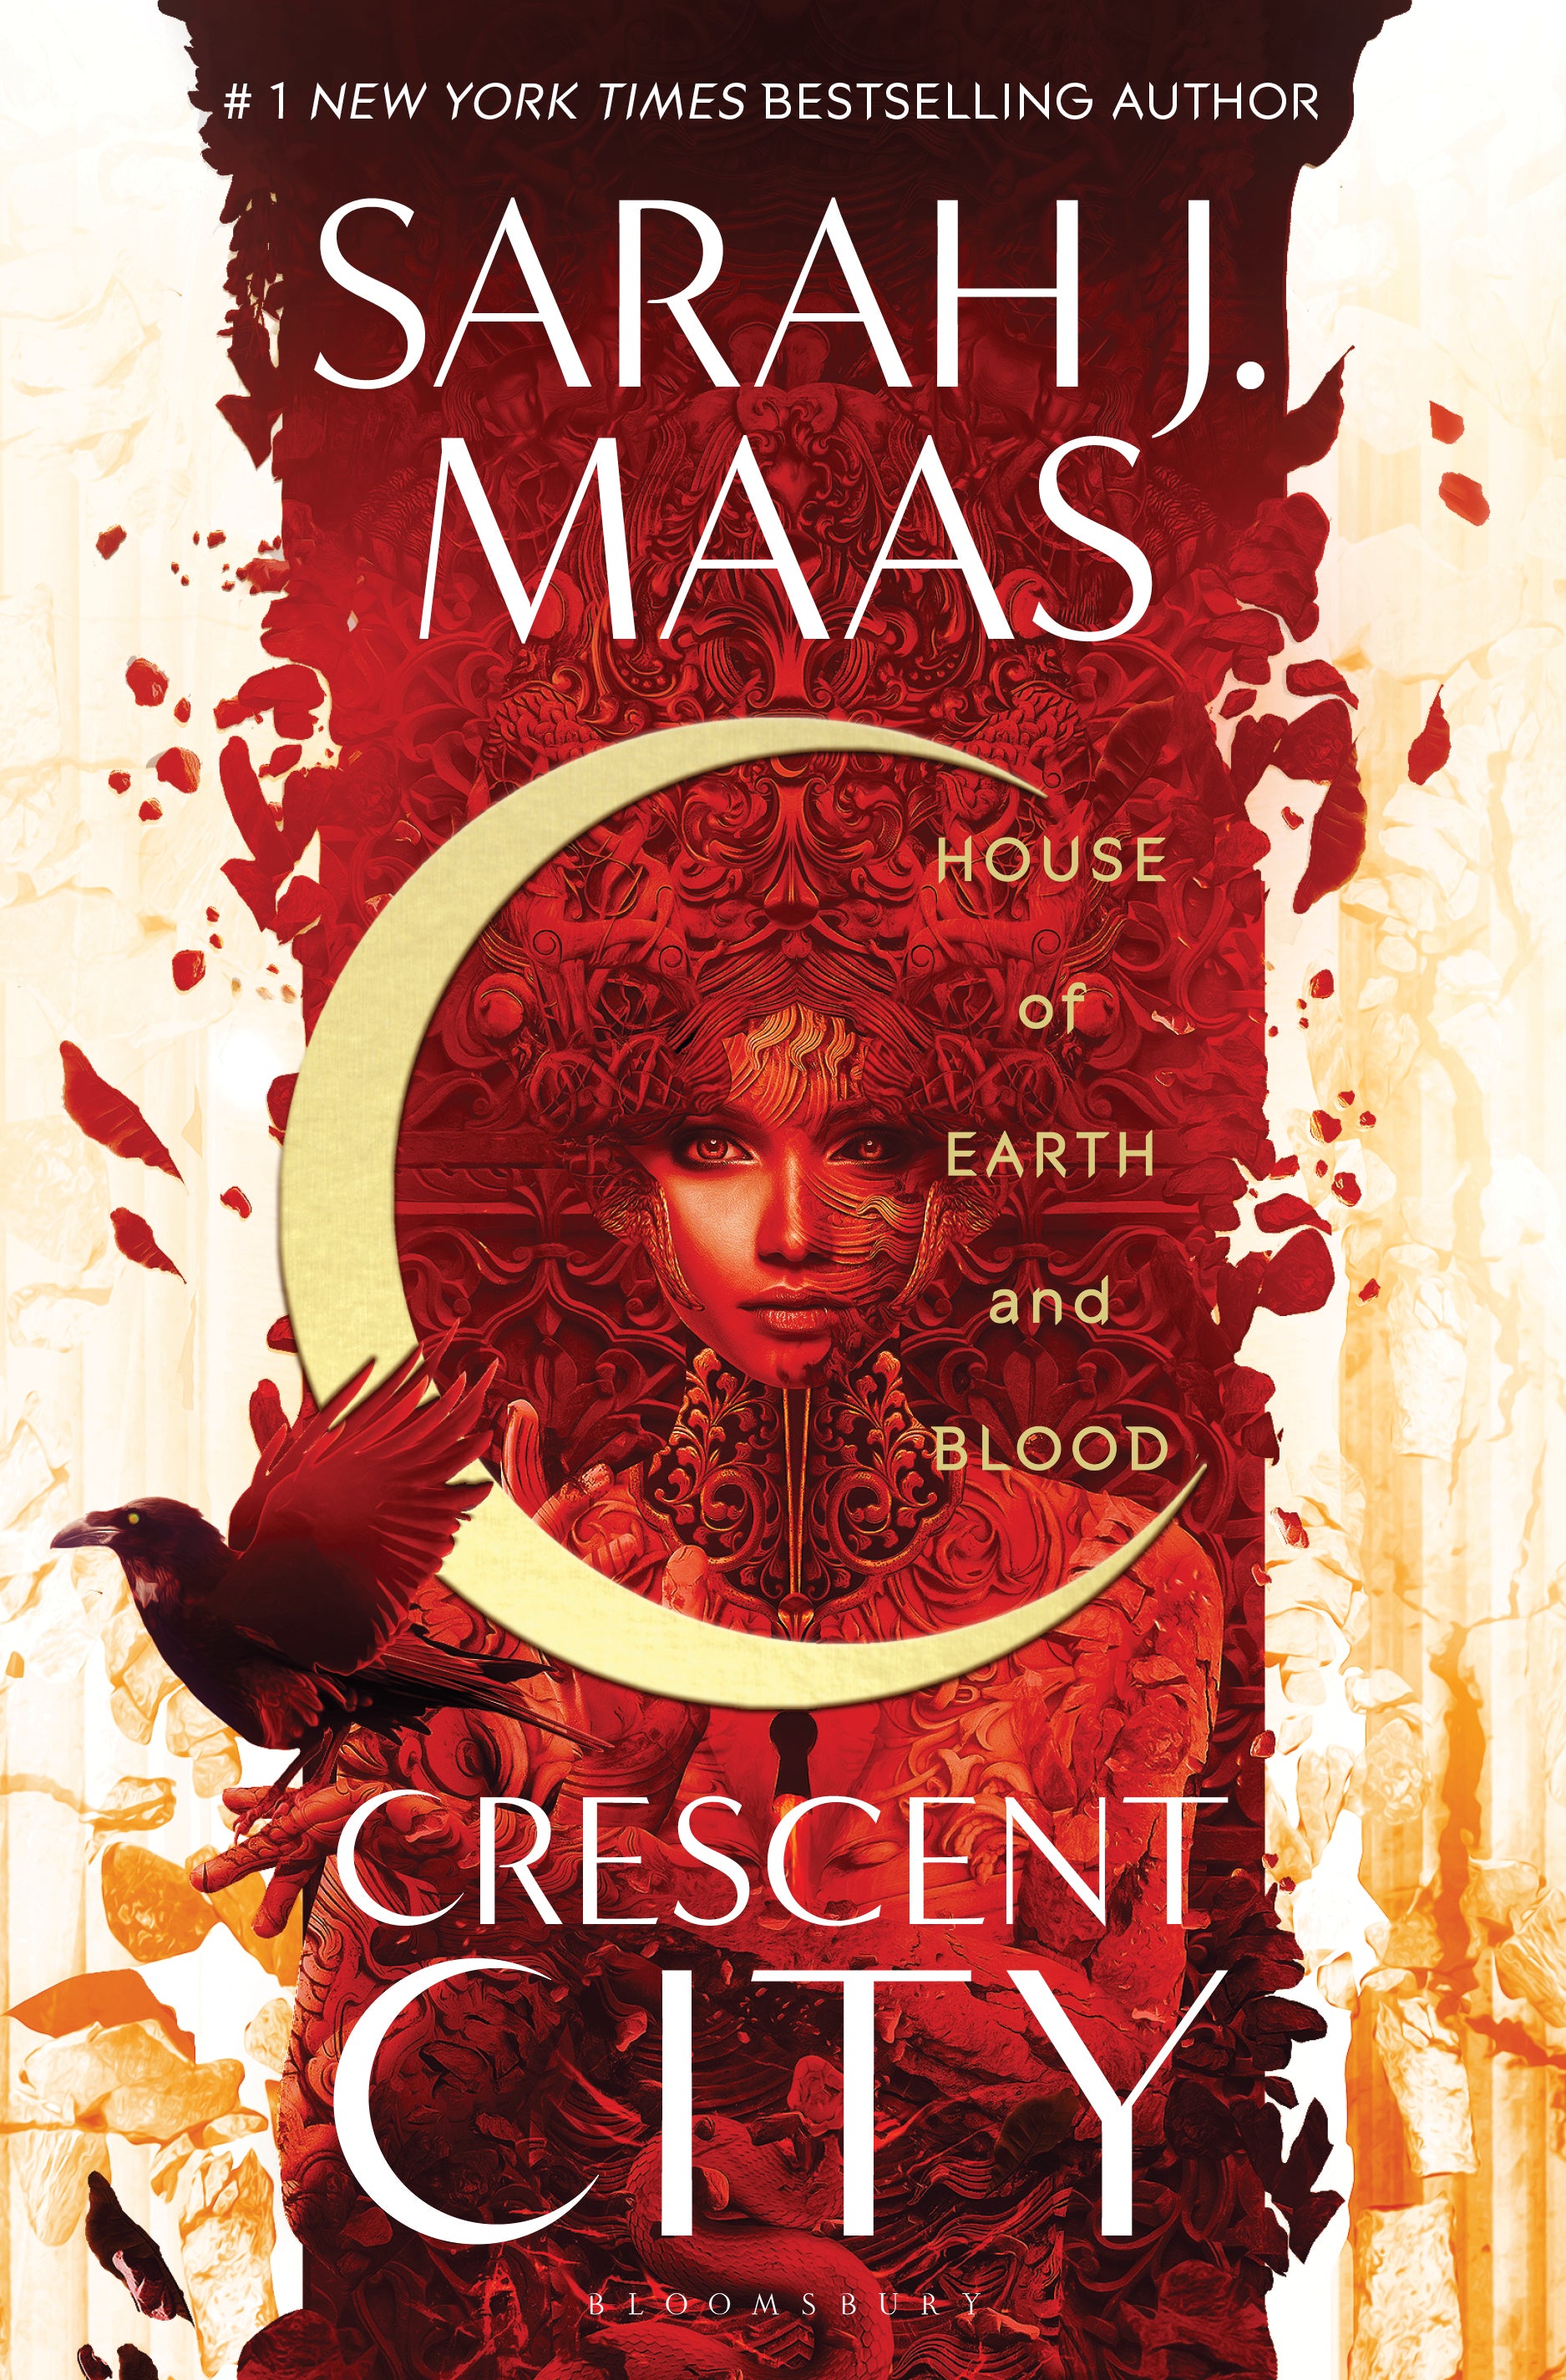 House of Earth and Blood - by Sarah J. Maas